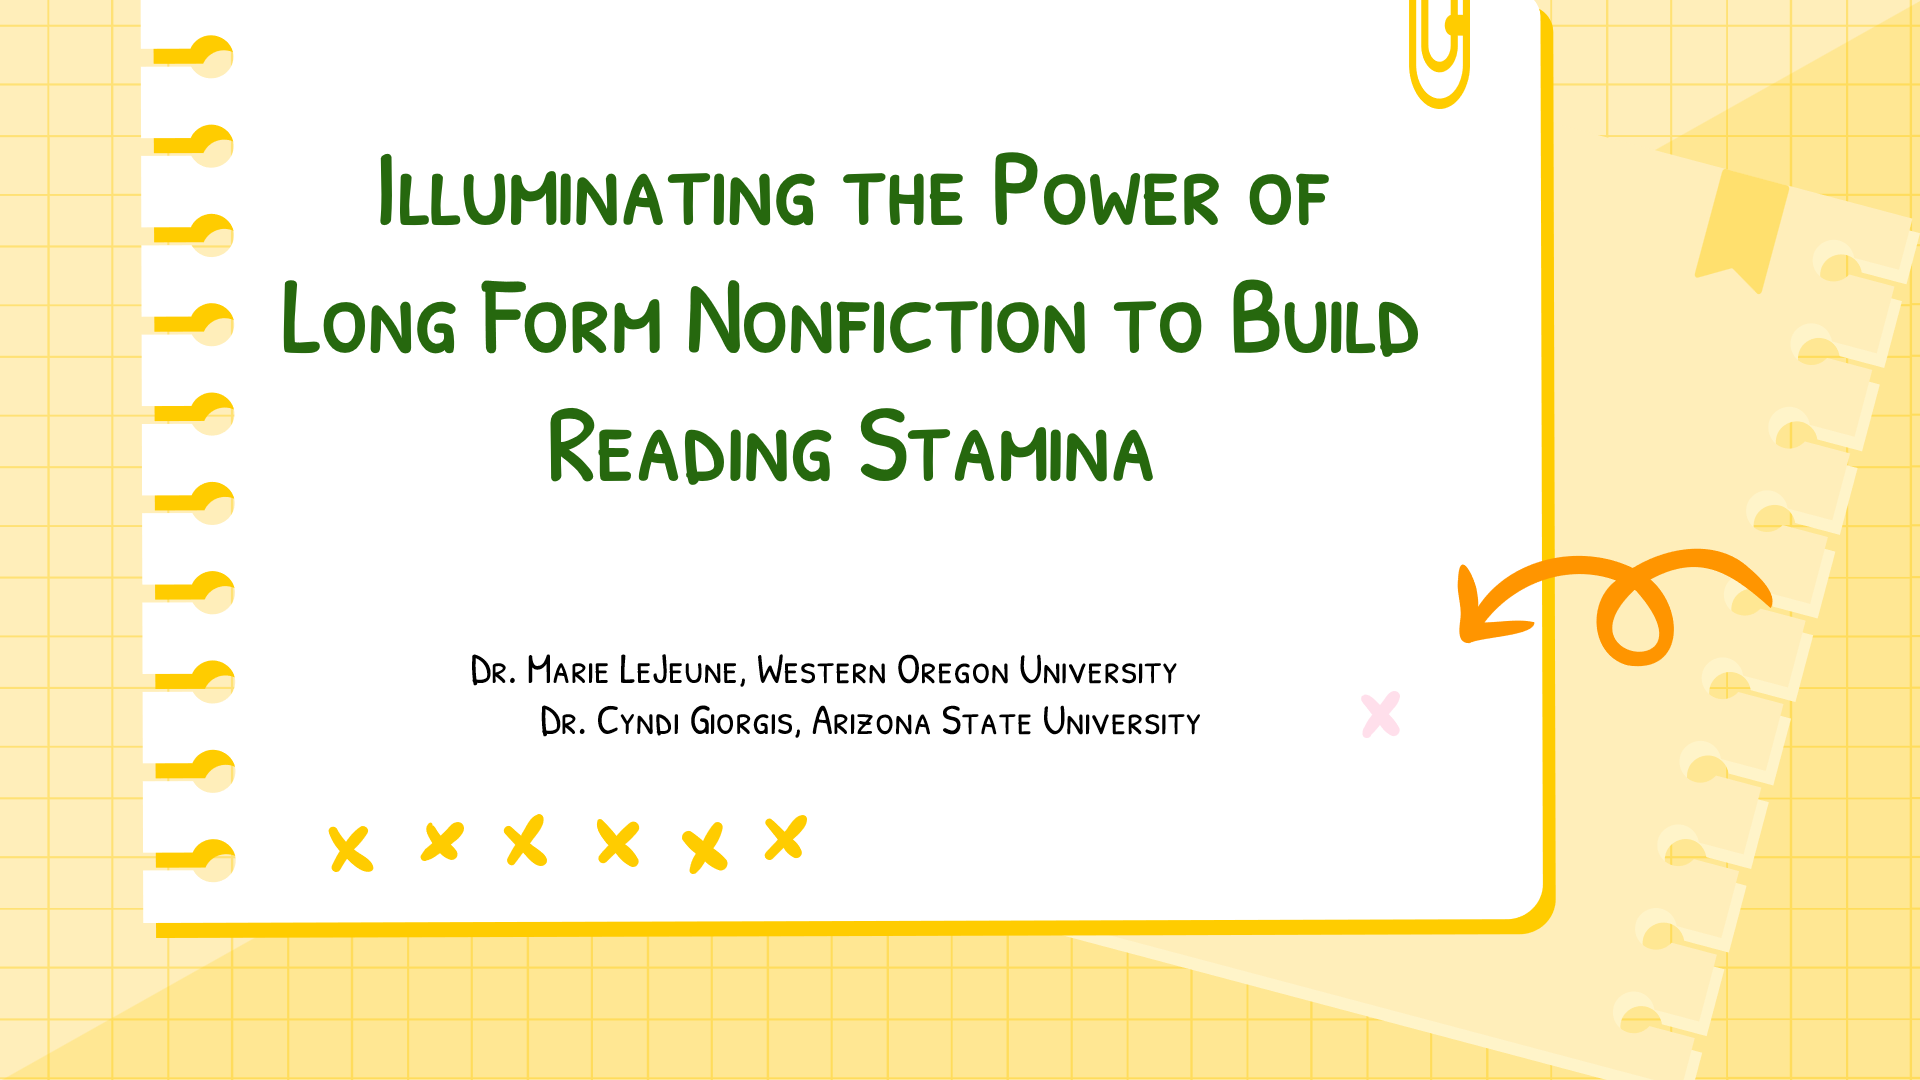 Illuminating the Power of Long Form Nonfiction to Build Reading Stamina